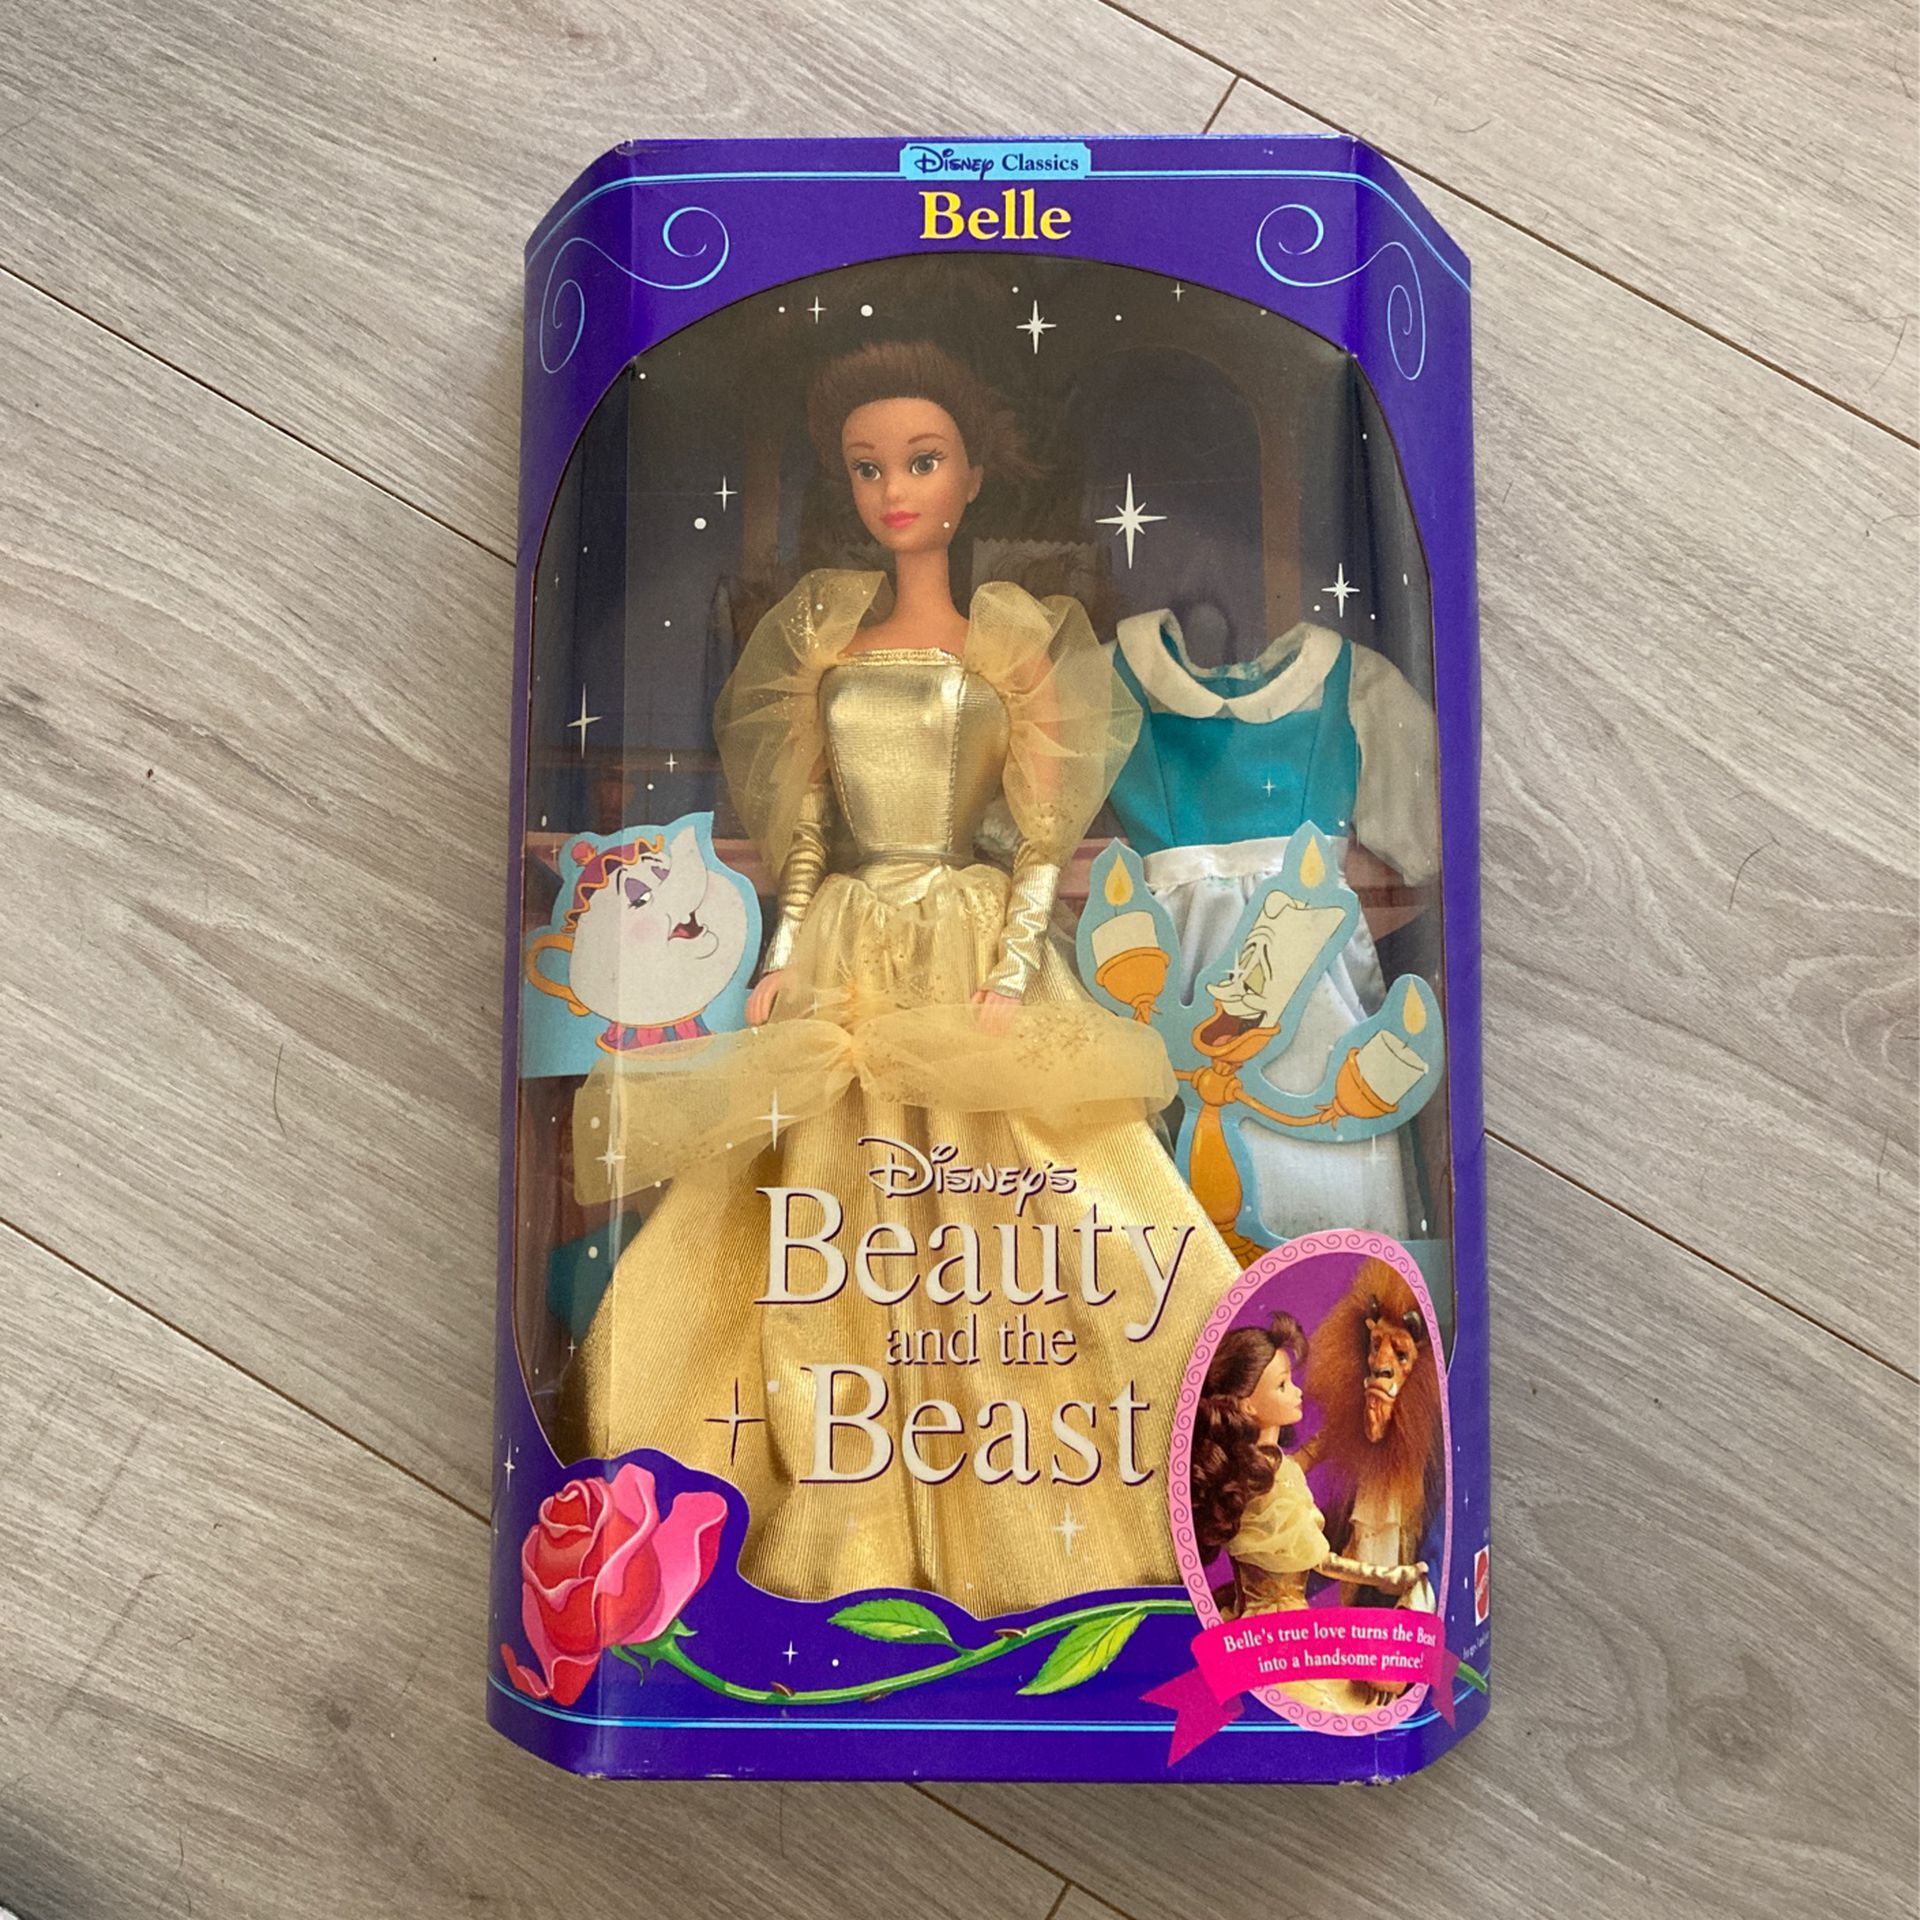 Disney’s Beauty And The Beast - Belle